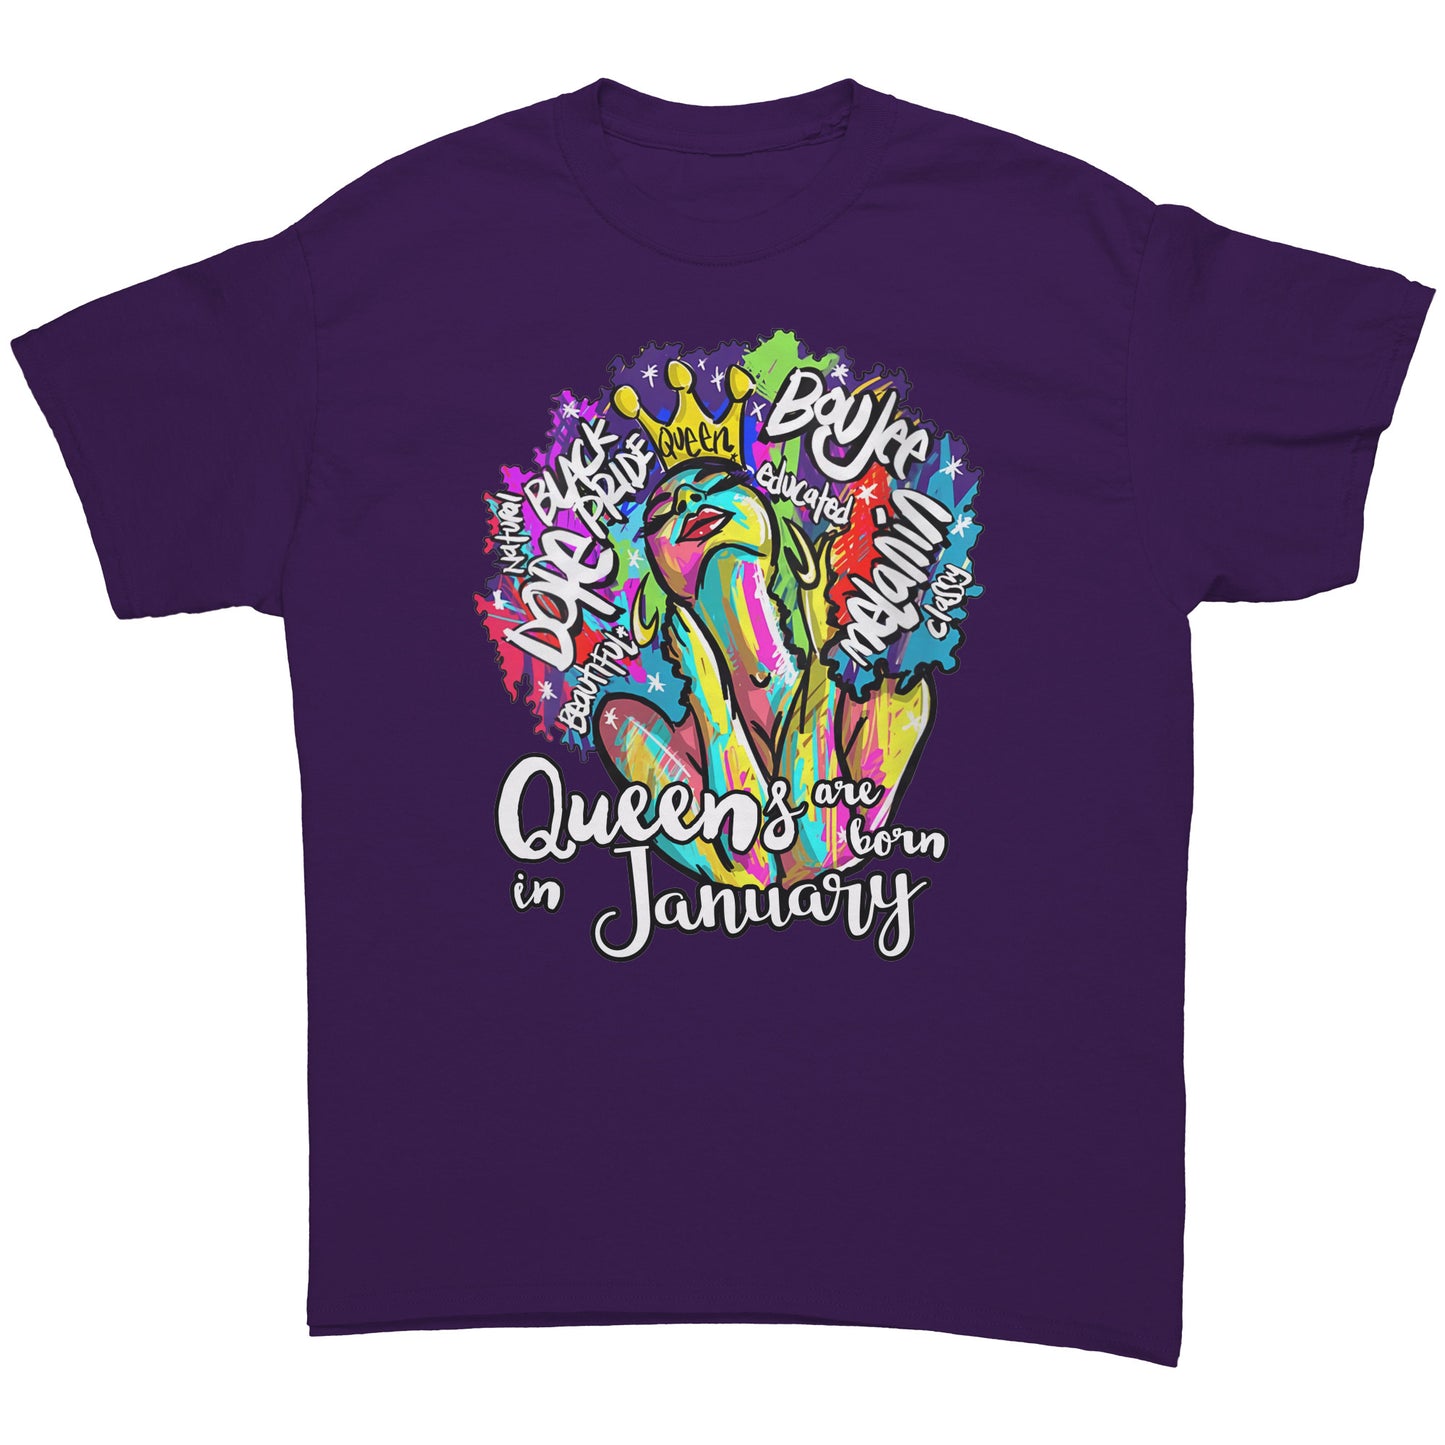 Queens Are Born In January Tee